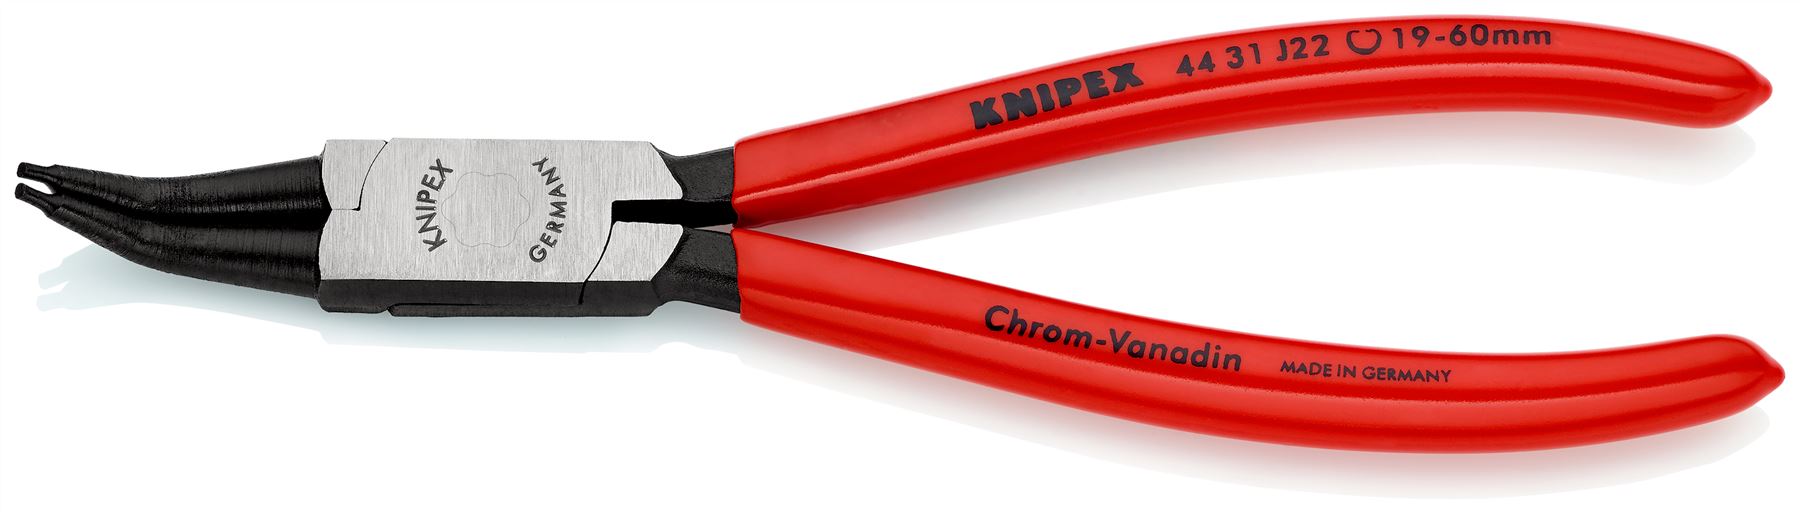 KNIPEX Circlip Pliers for Internal Circlips in Bore Holes 45° Angled 180mm 1.8mm Diameter Tips 44 31 J22